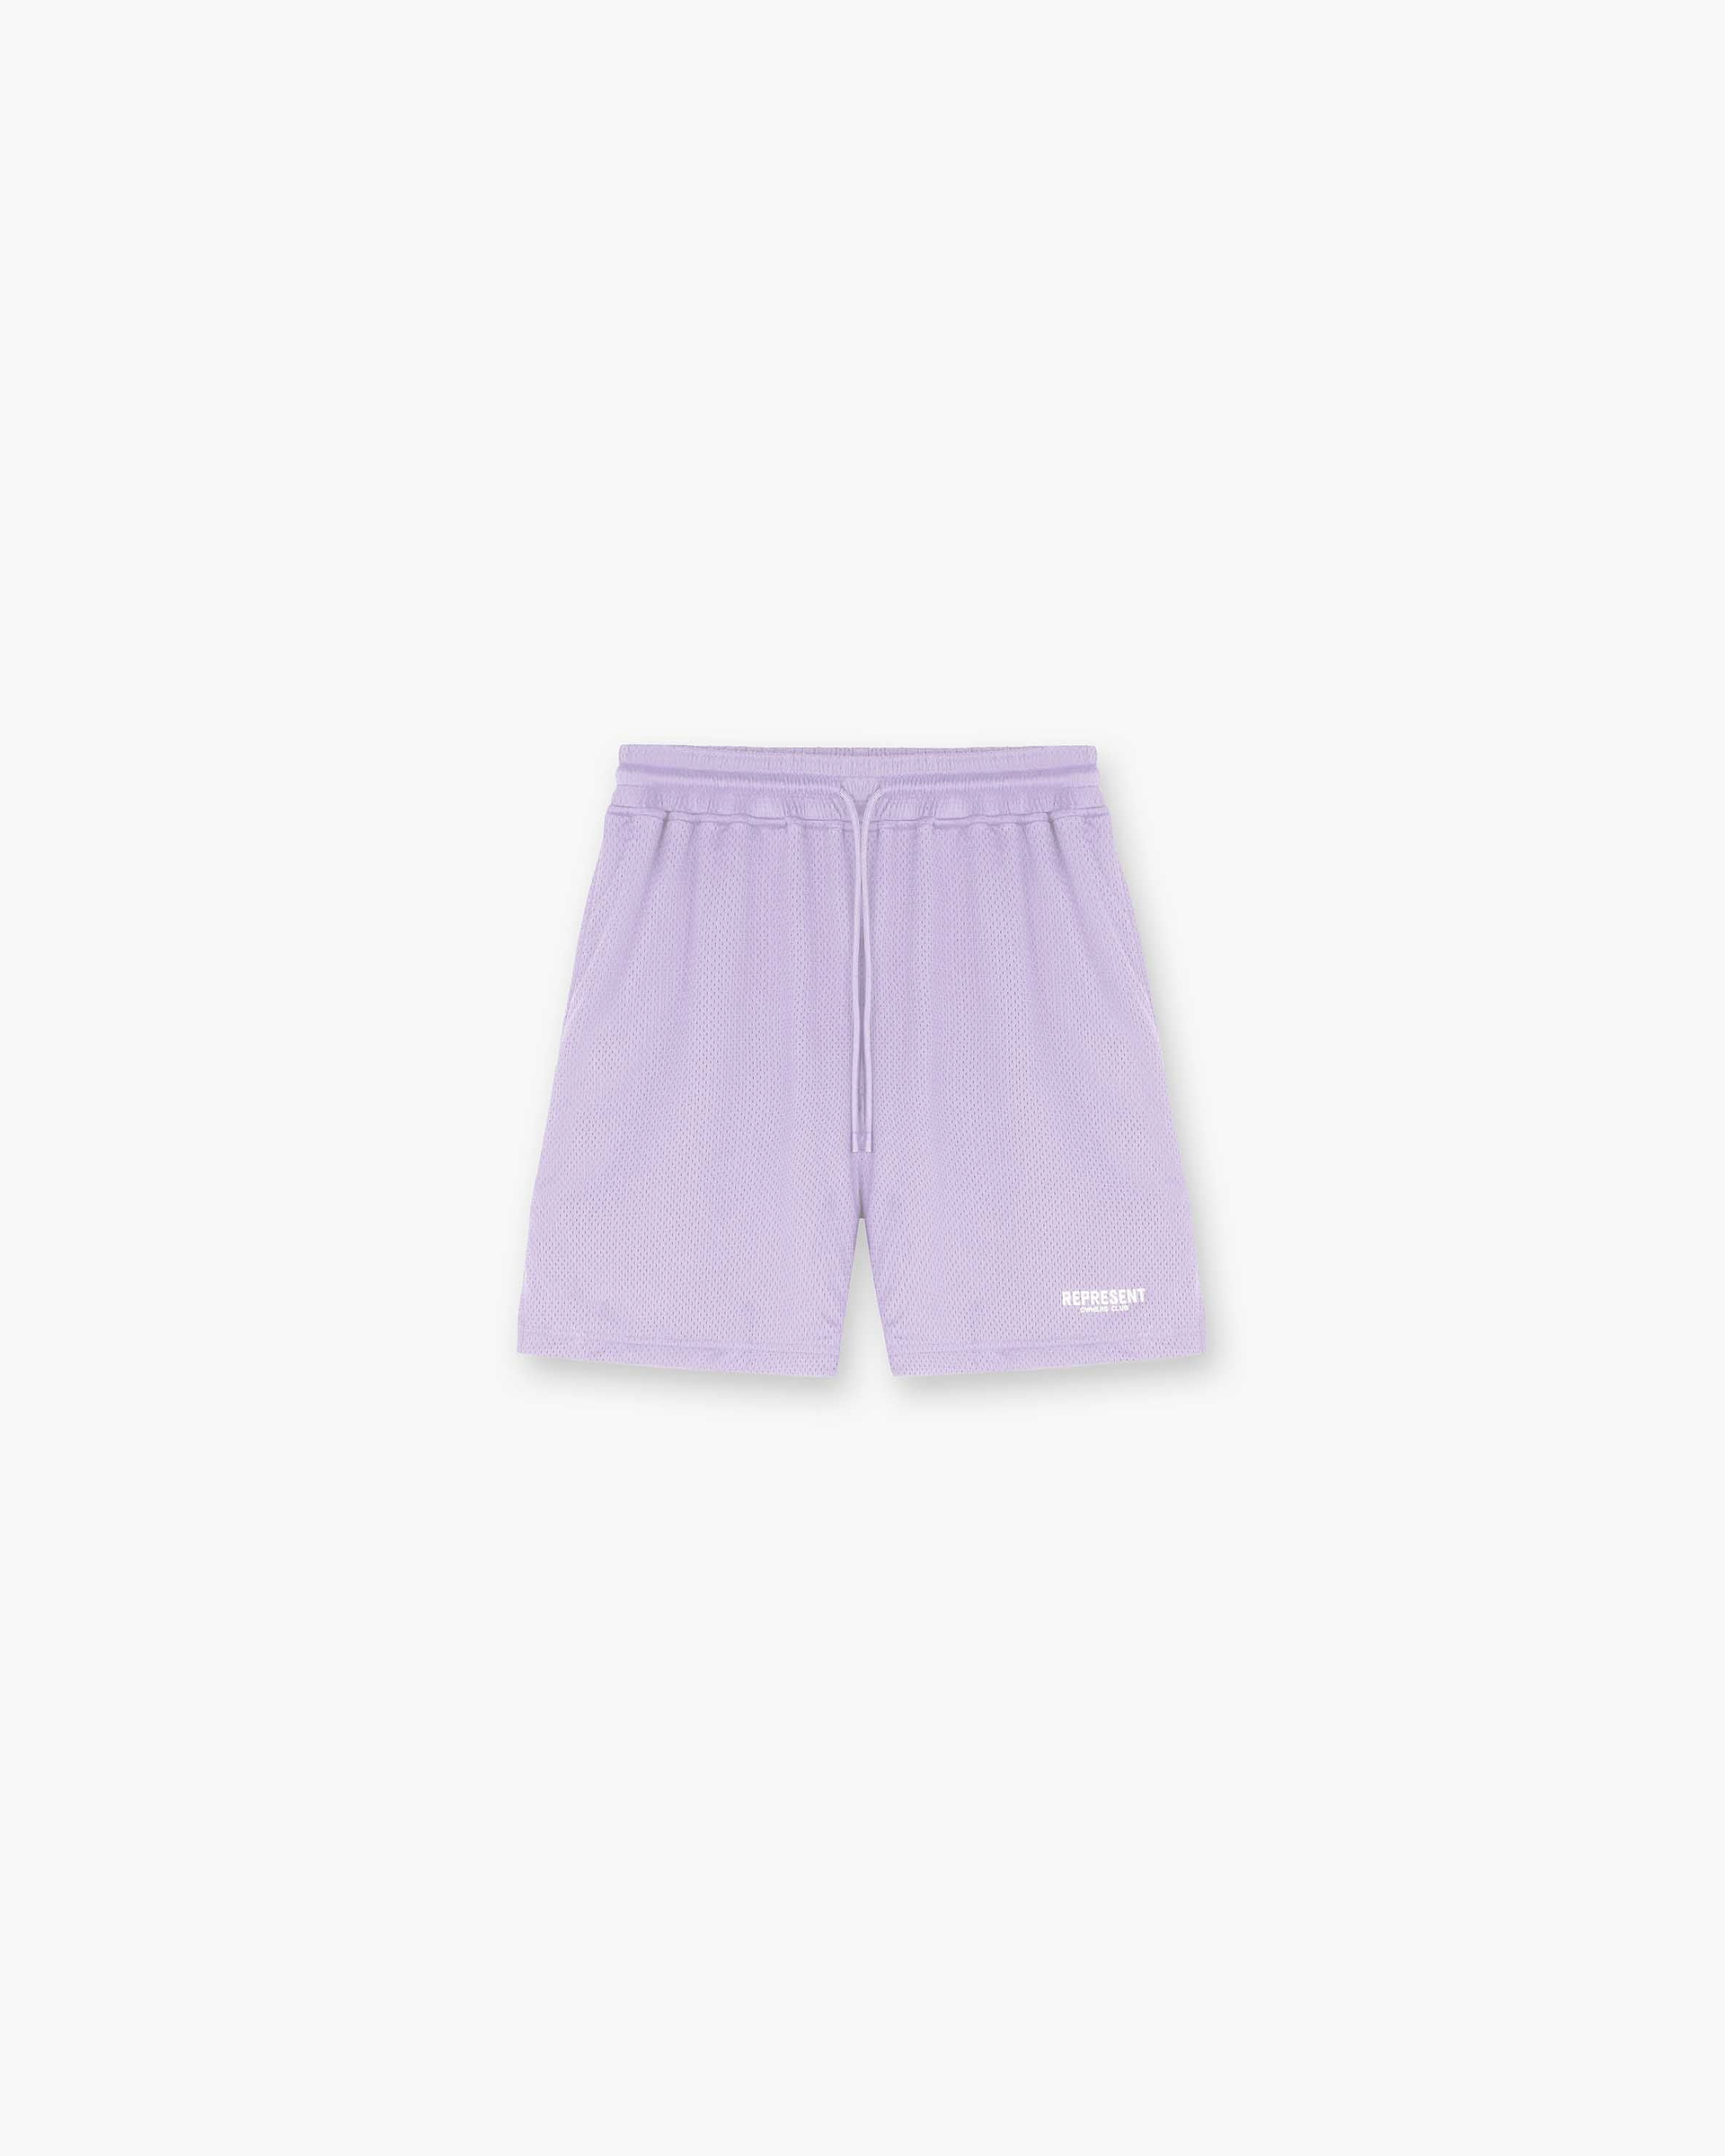 Represent Owners Club Mesh Shorts - Lilac